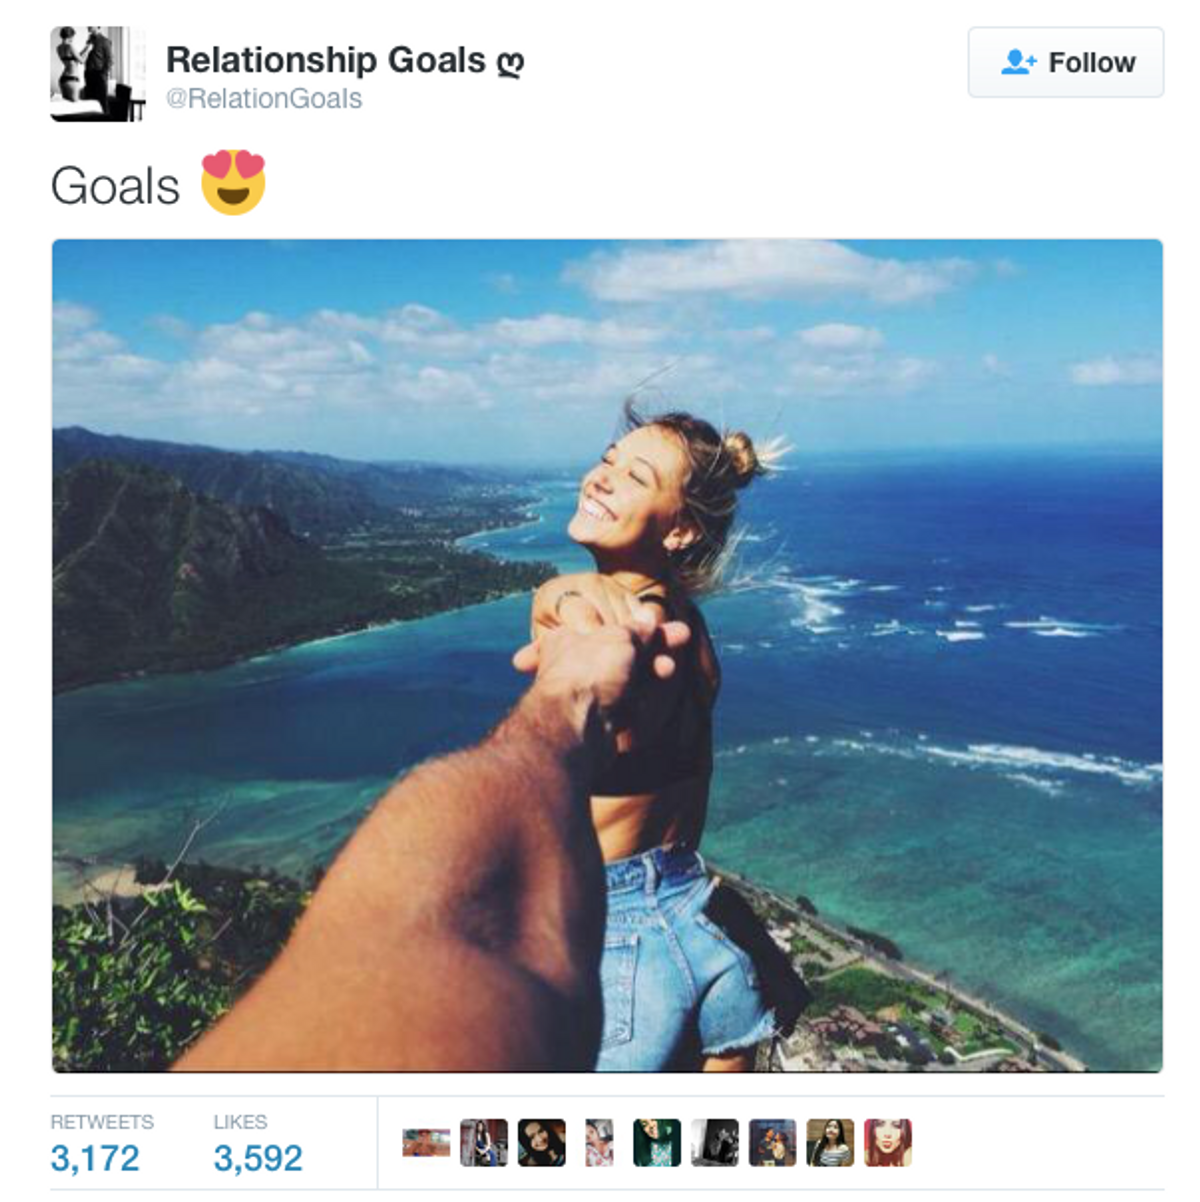 Why I'm Fed Up With "Relationship Goals"